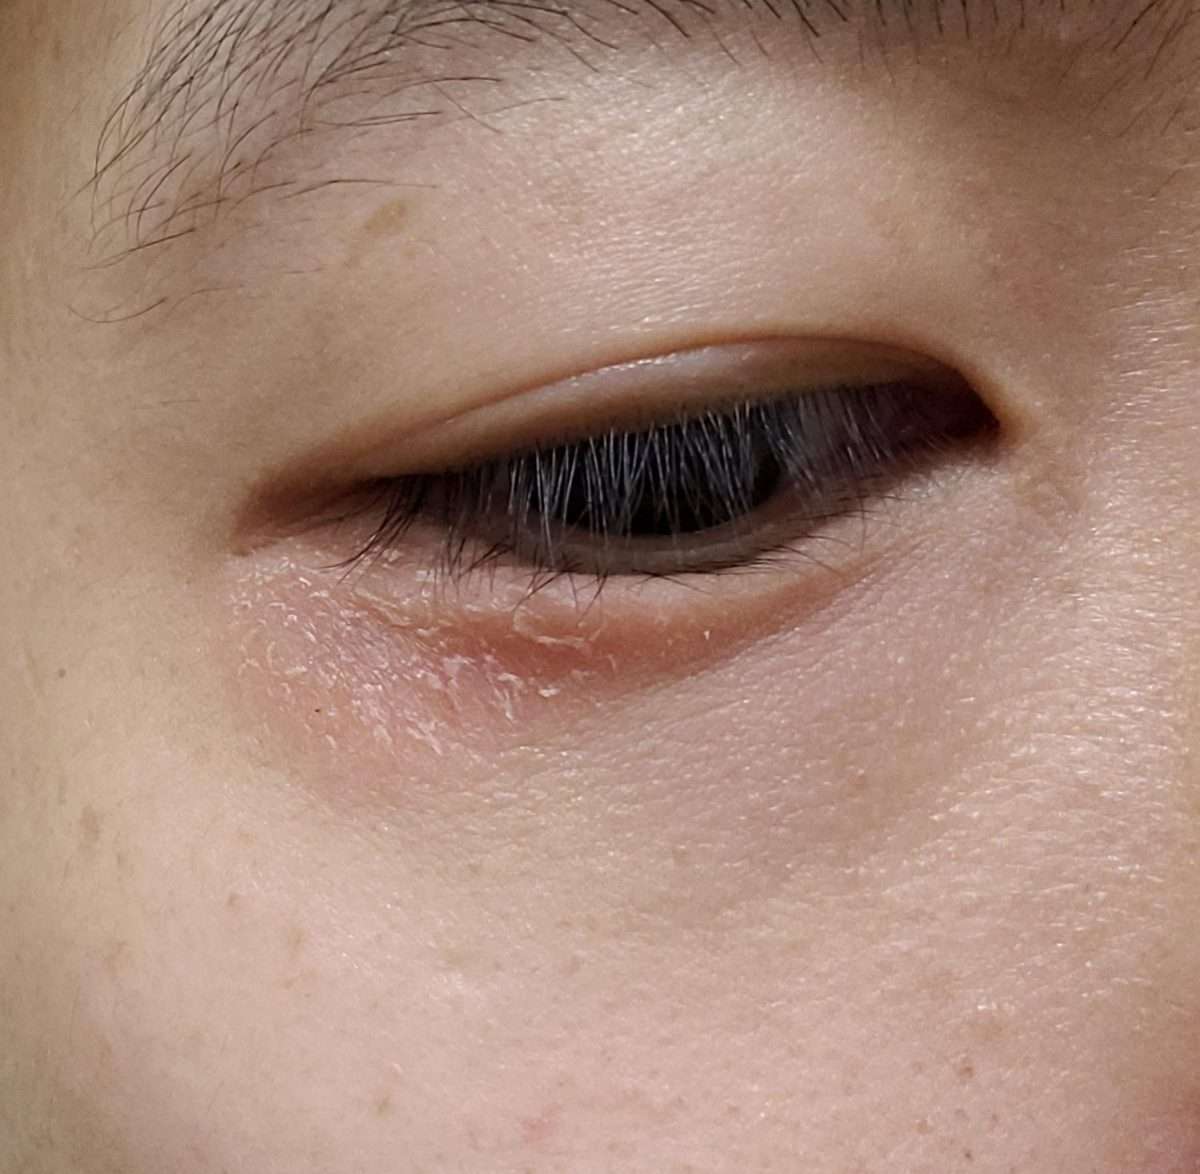 Scaly and Dry Skin with Redness on Corner of Eye. Anyone know what it ...